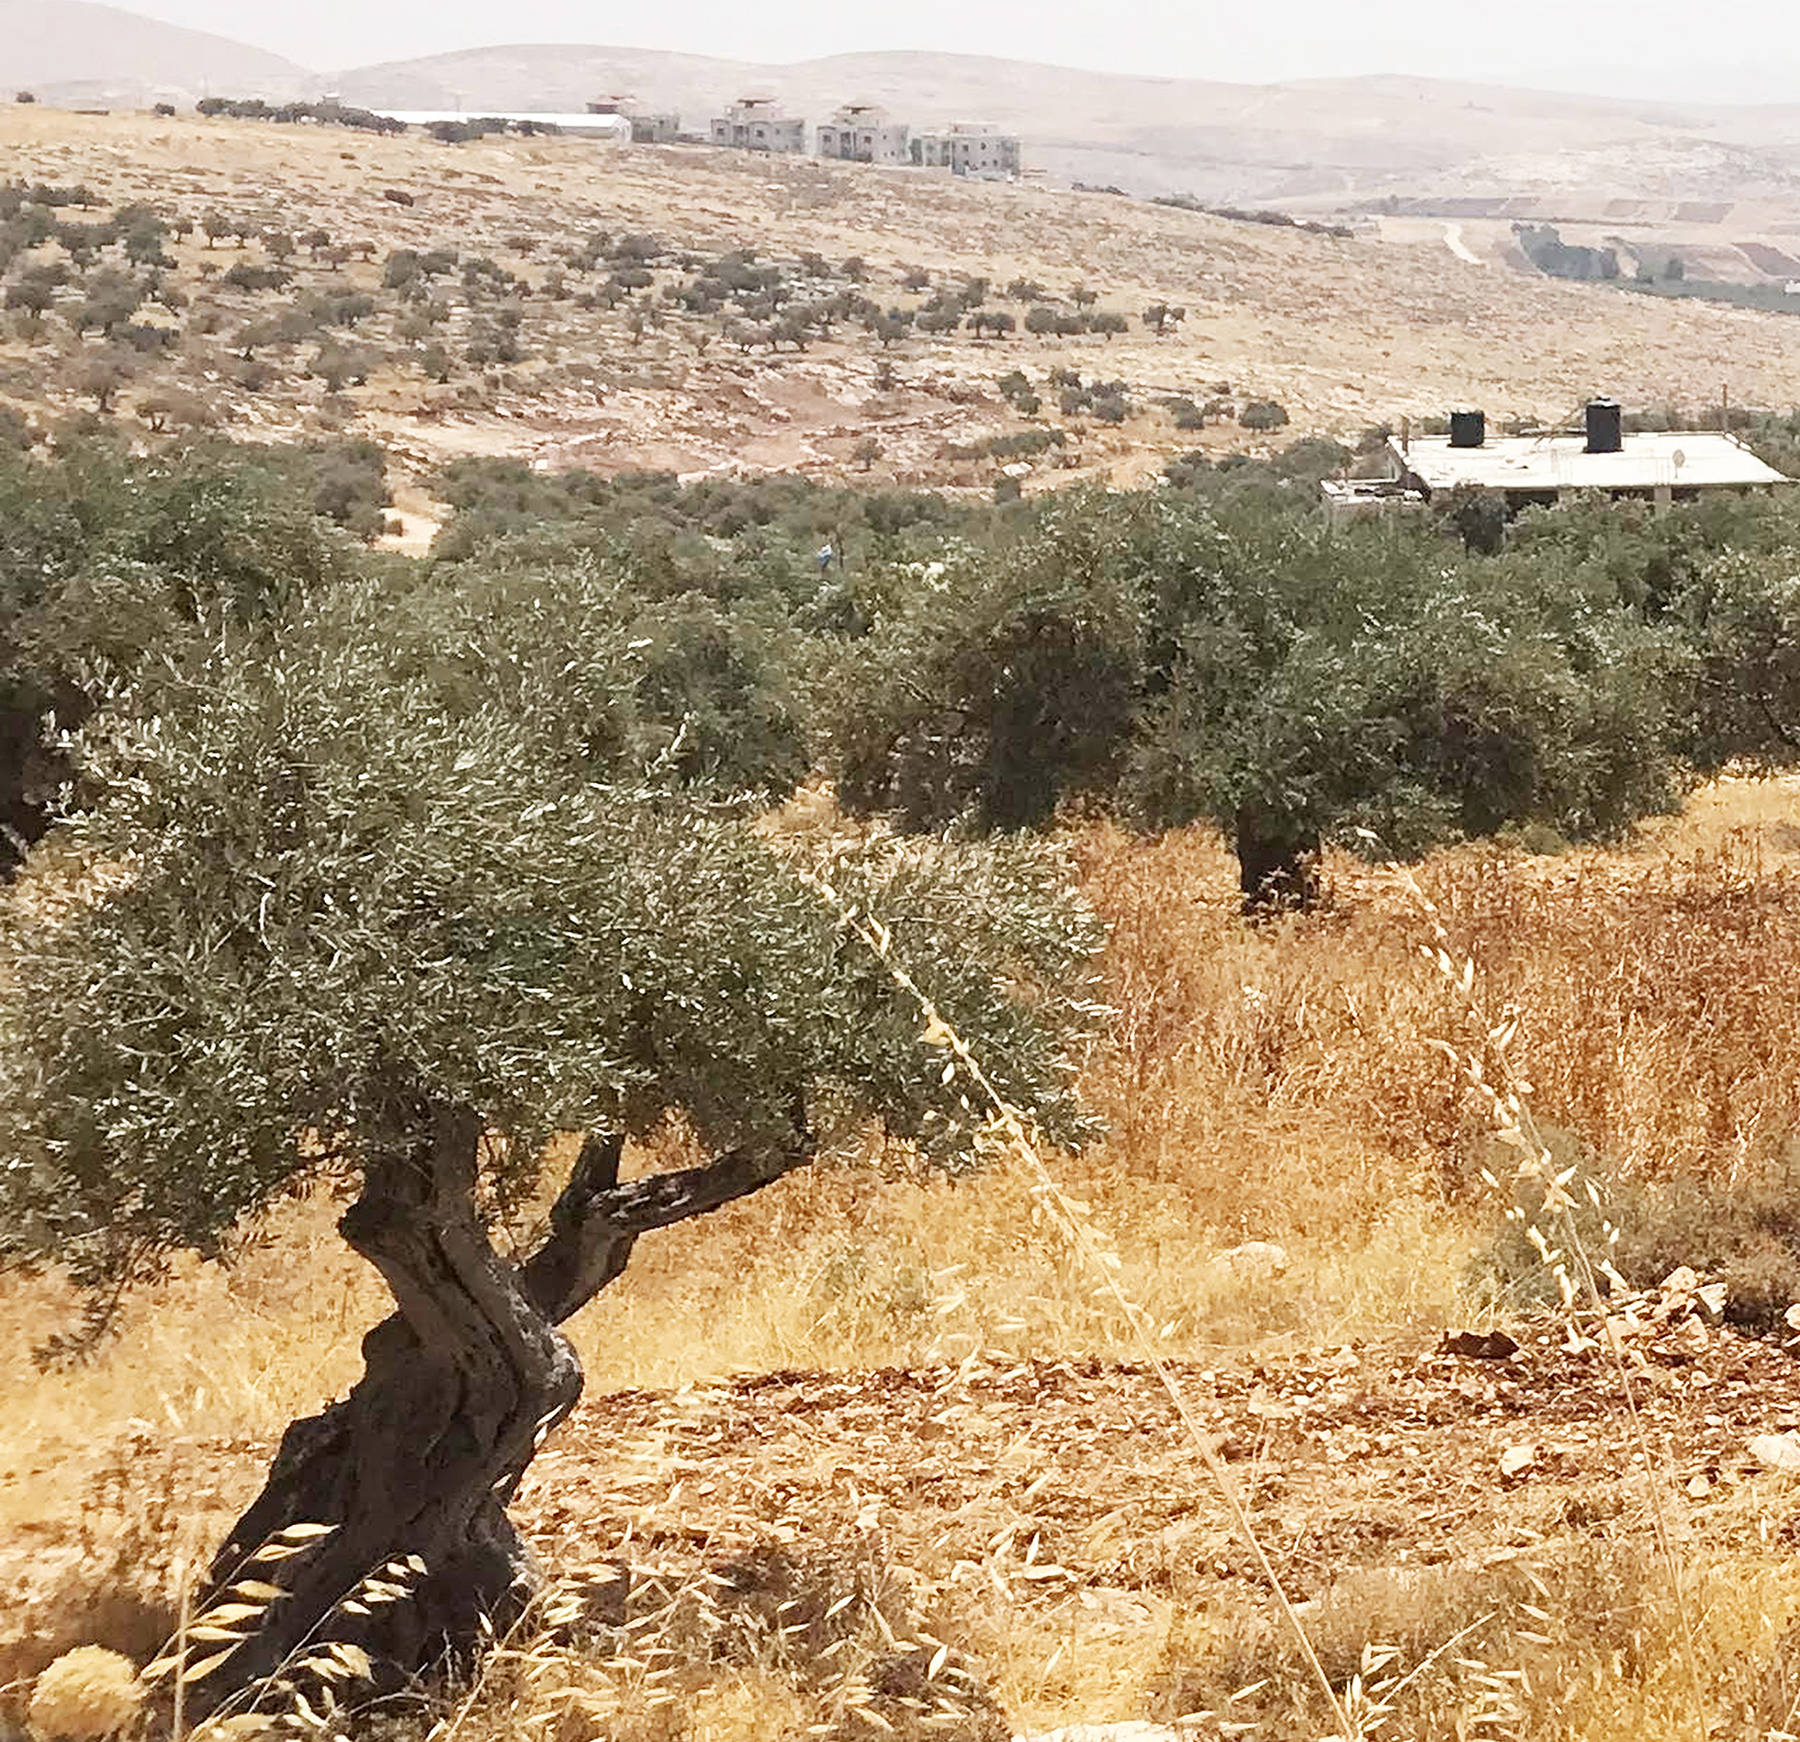 Family farm in Pakistan shows olive trees in foreground and Israeli settlement in background. Fence encroaching on property is hidden behind hill in-between.